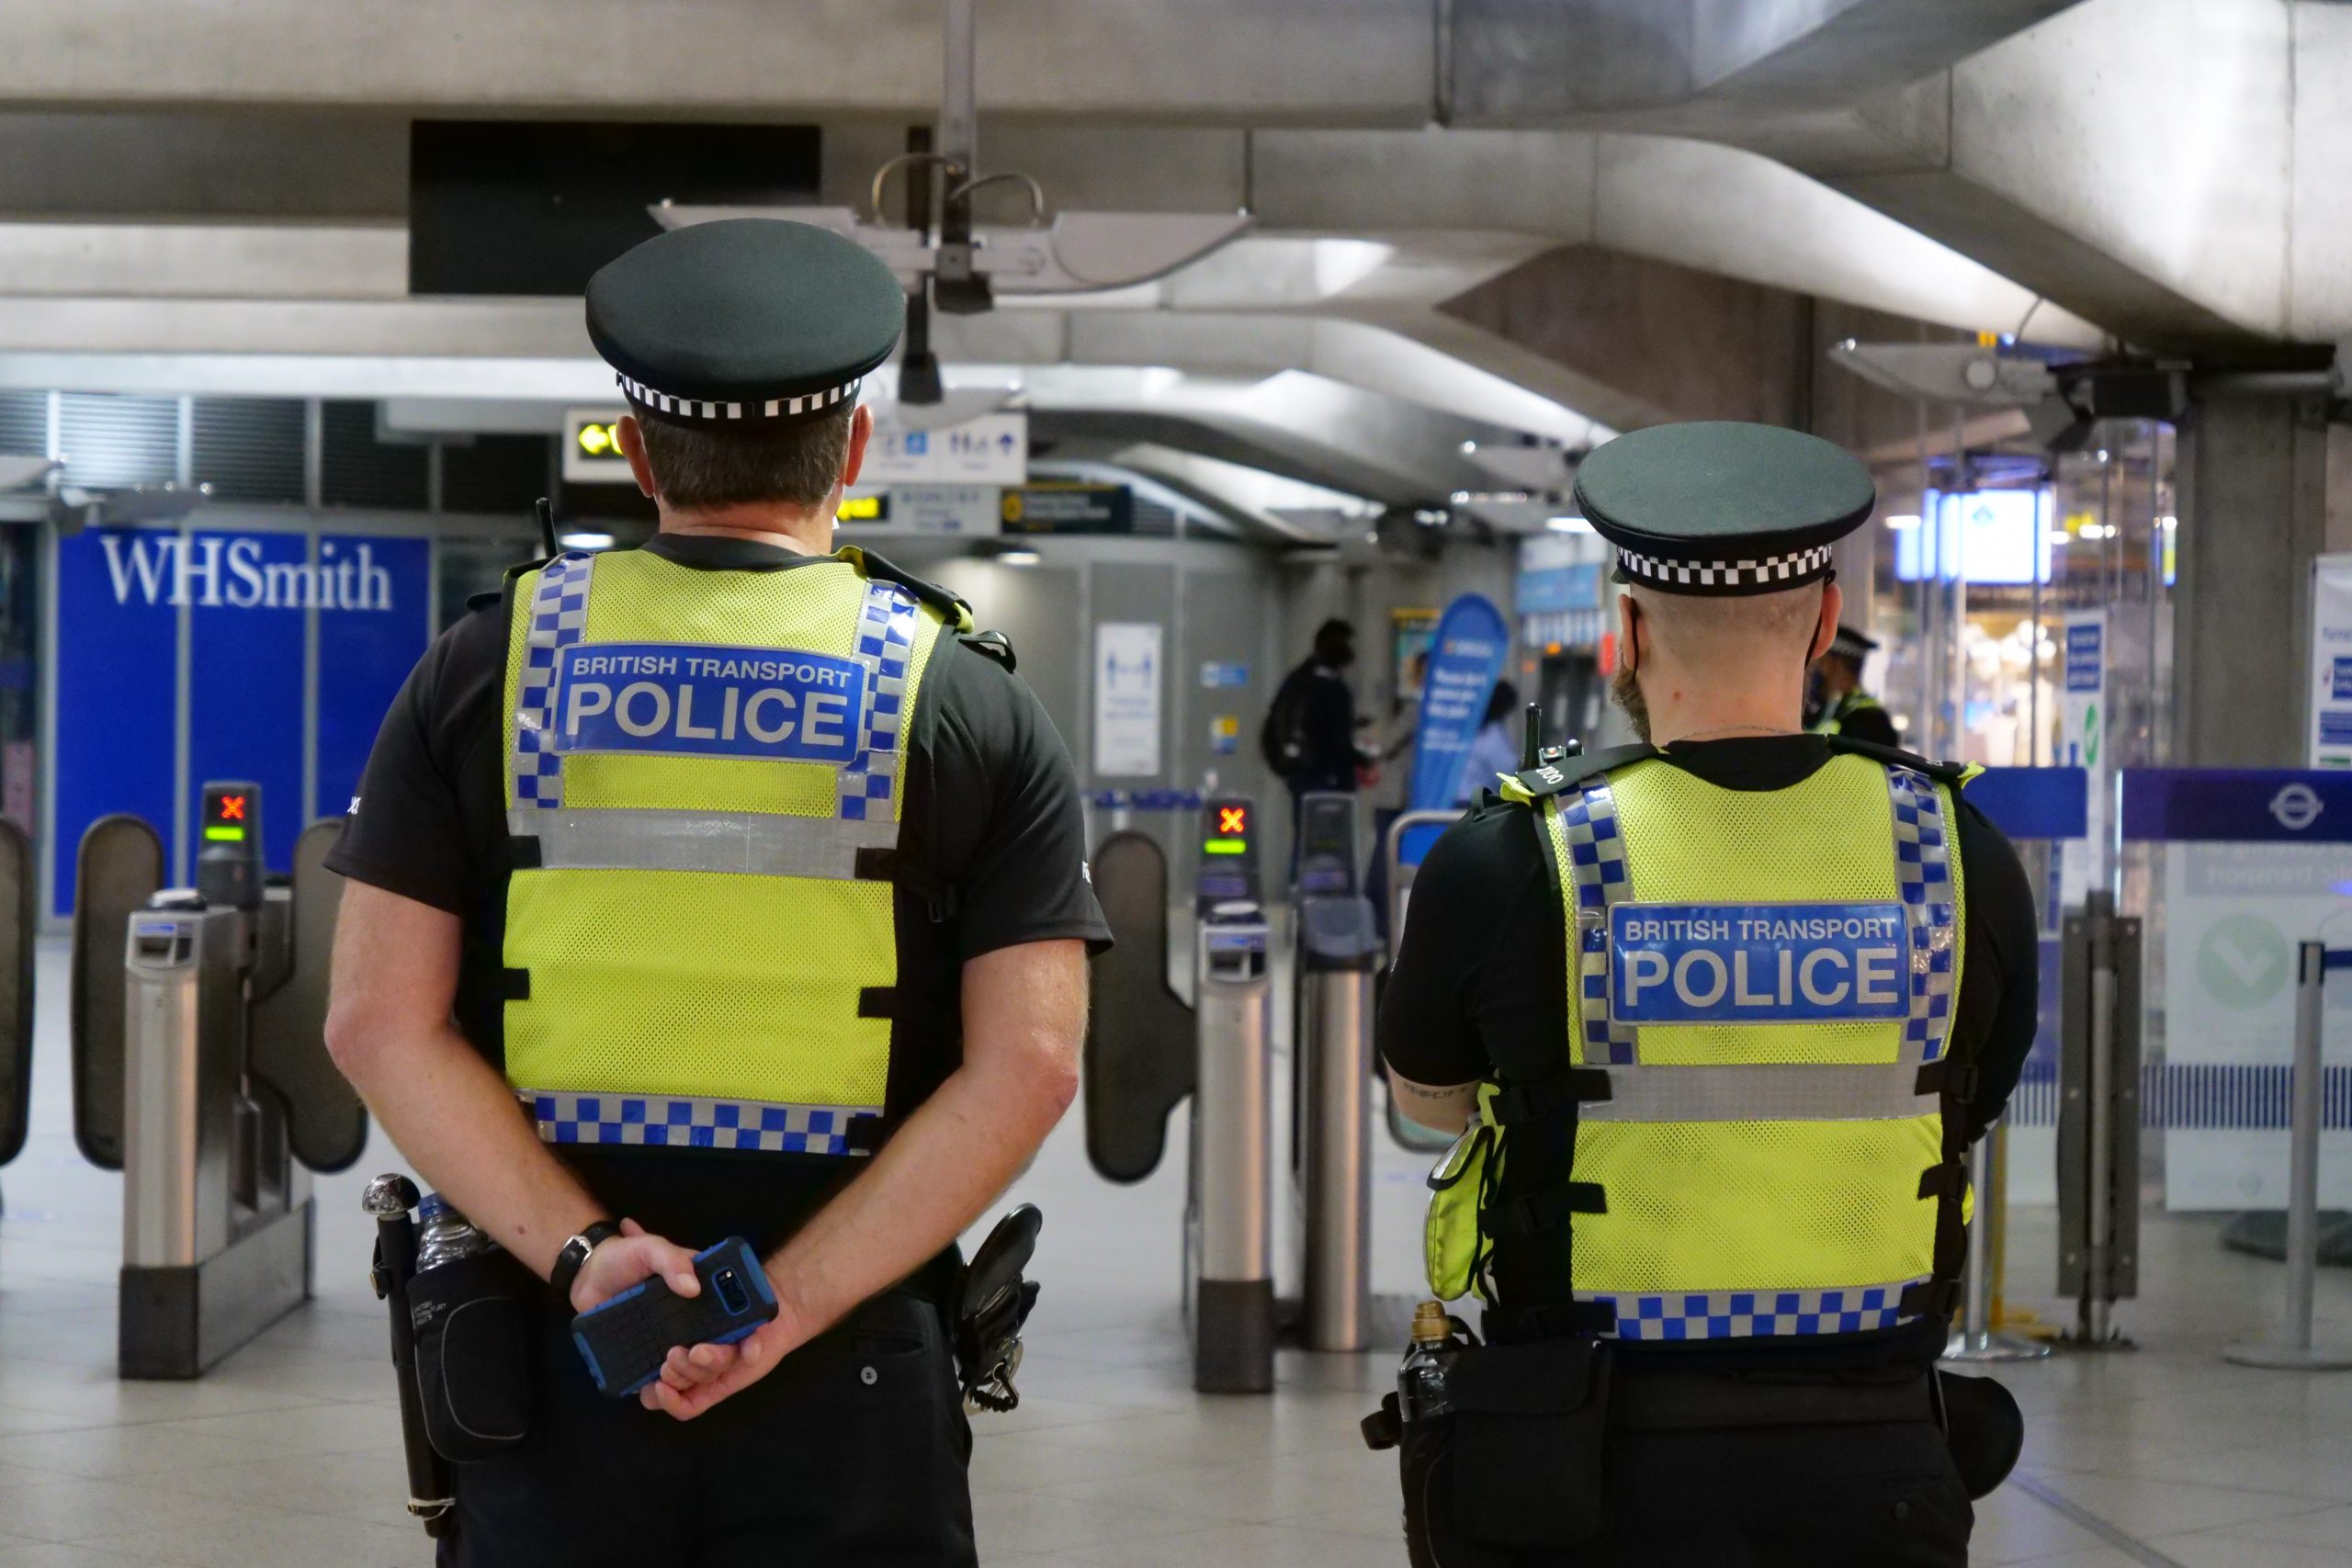 Two male police officers stand facing away from the camera in a London Underground station. They are both wearing yellow high vis jackets with the word "police" emblazoned on the back.